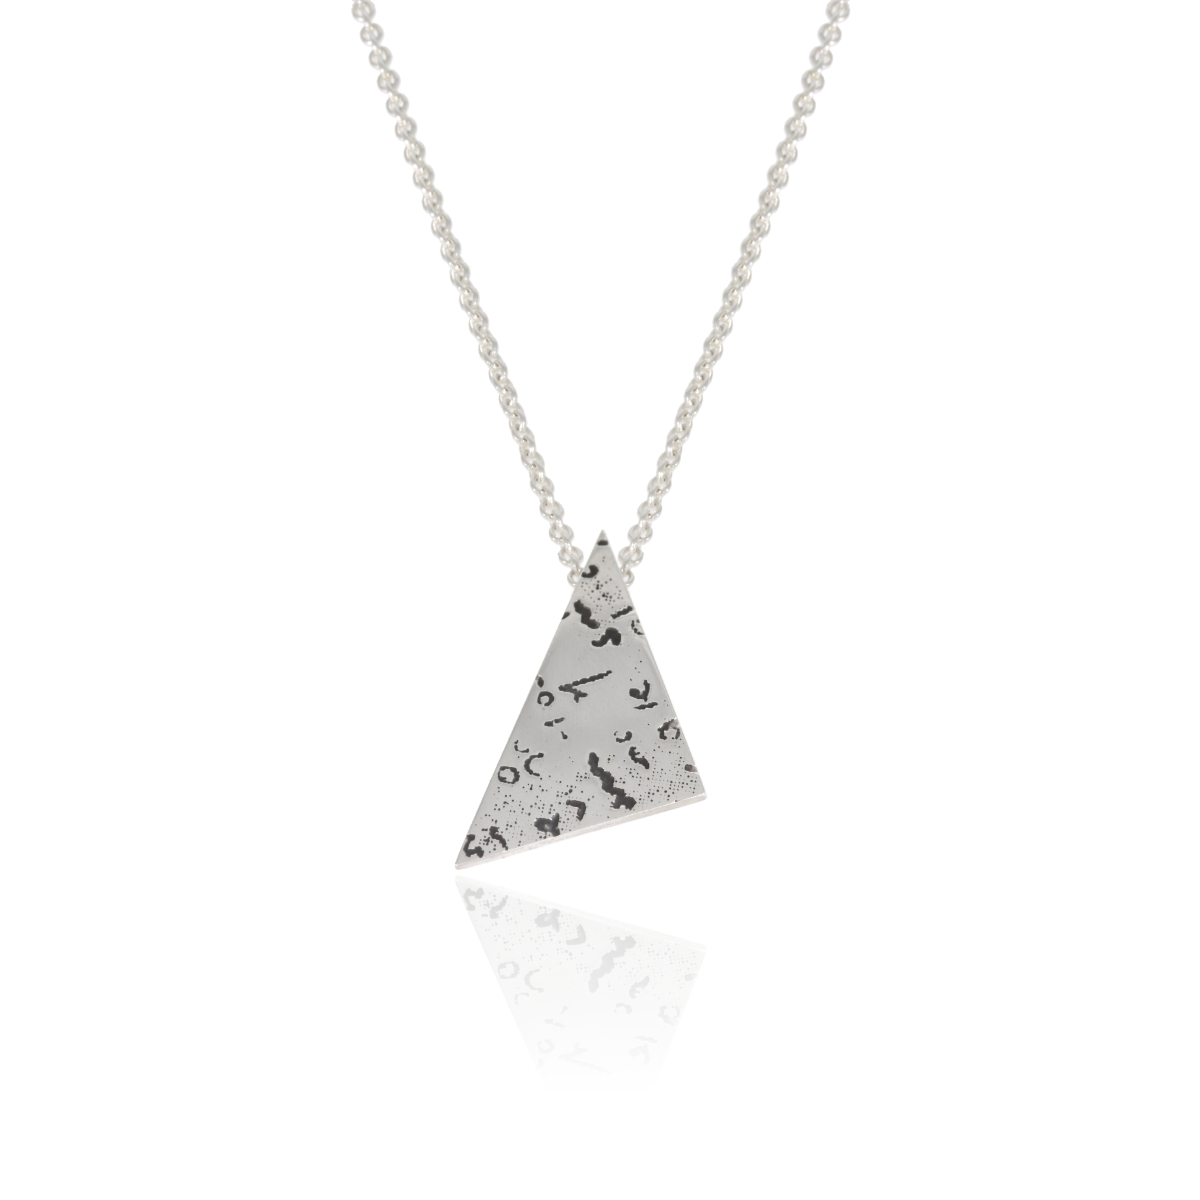 Silver angular pendant with etched and oxidised handwriting